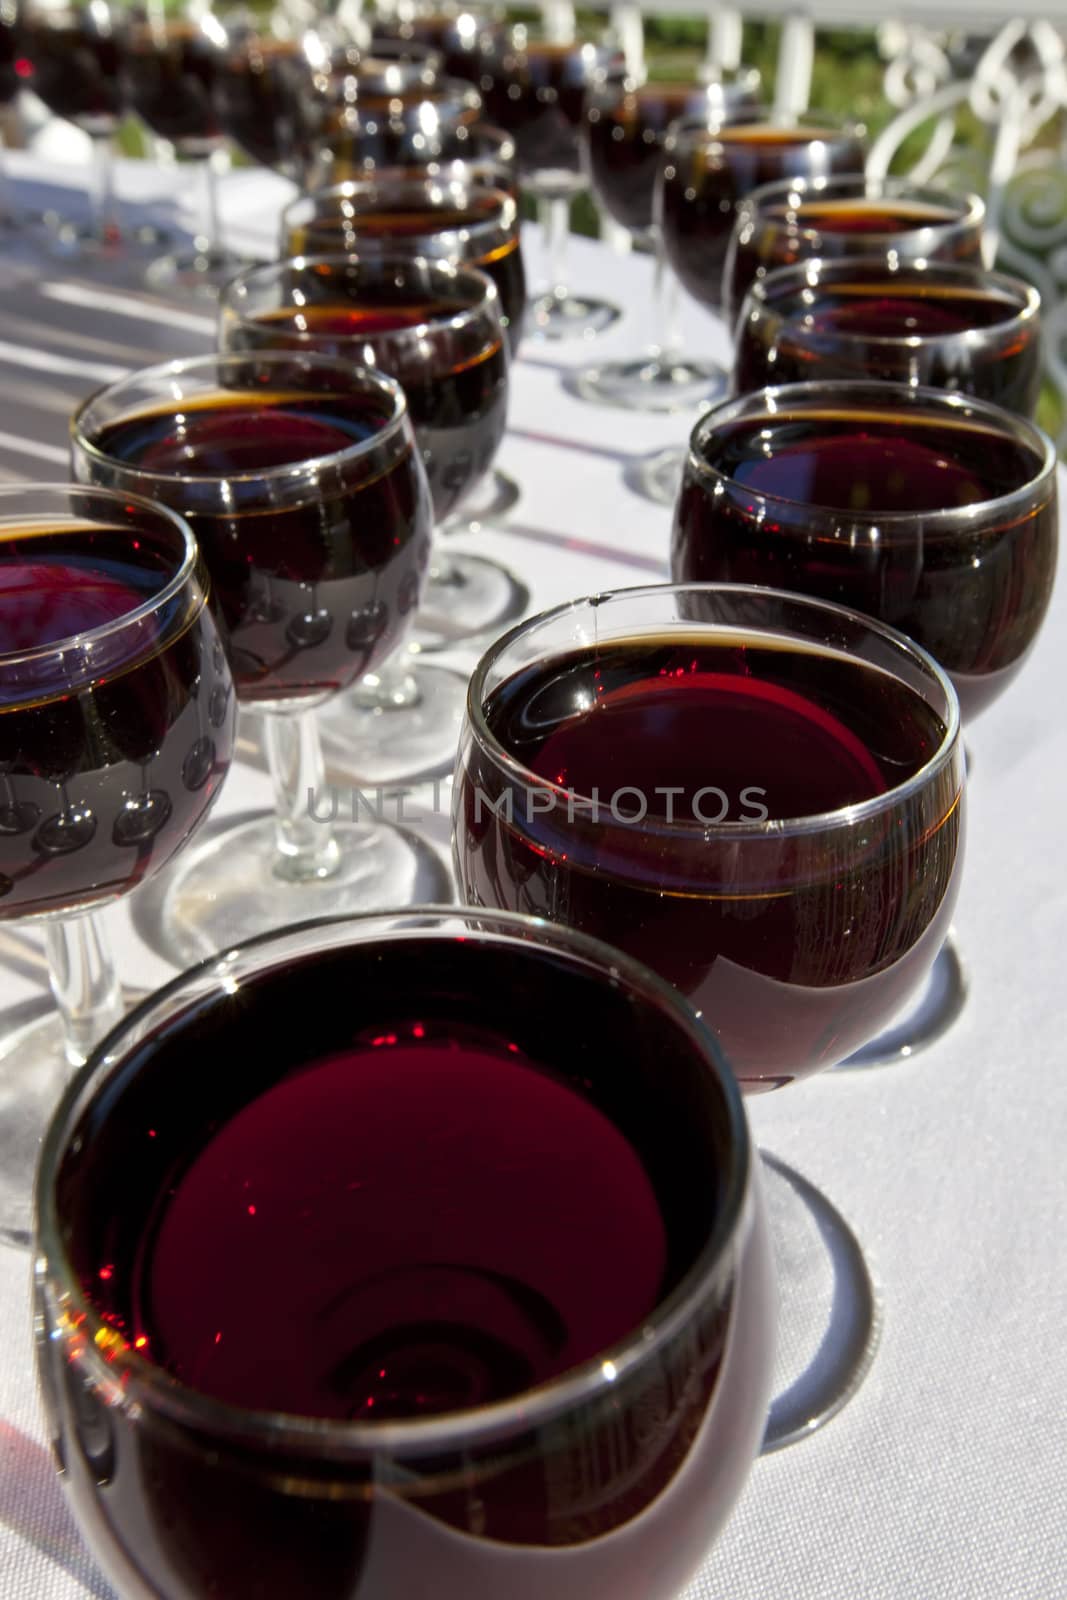 Rows of wineglasses filled with red wine